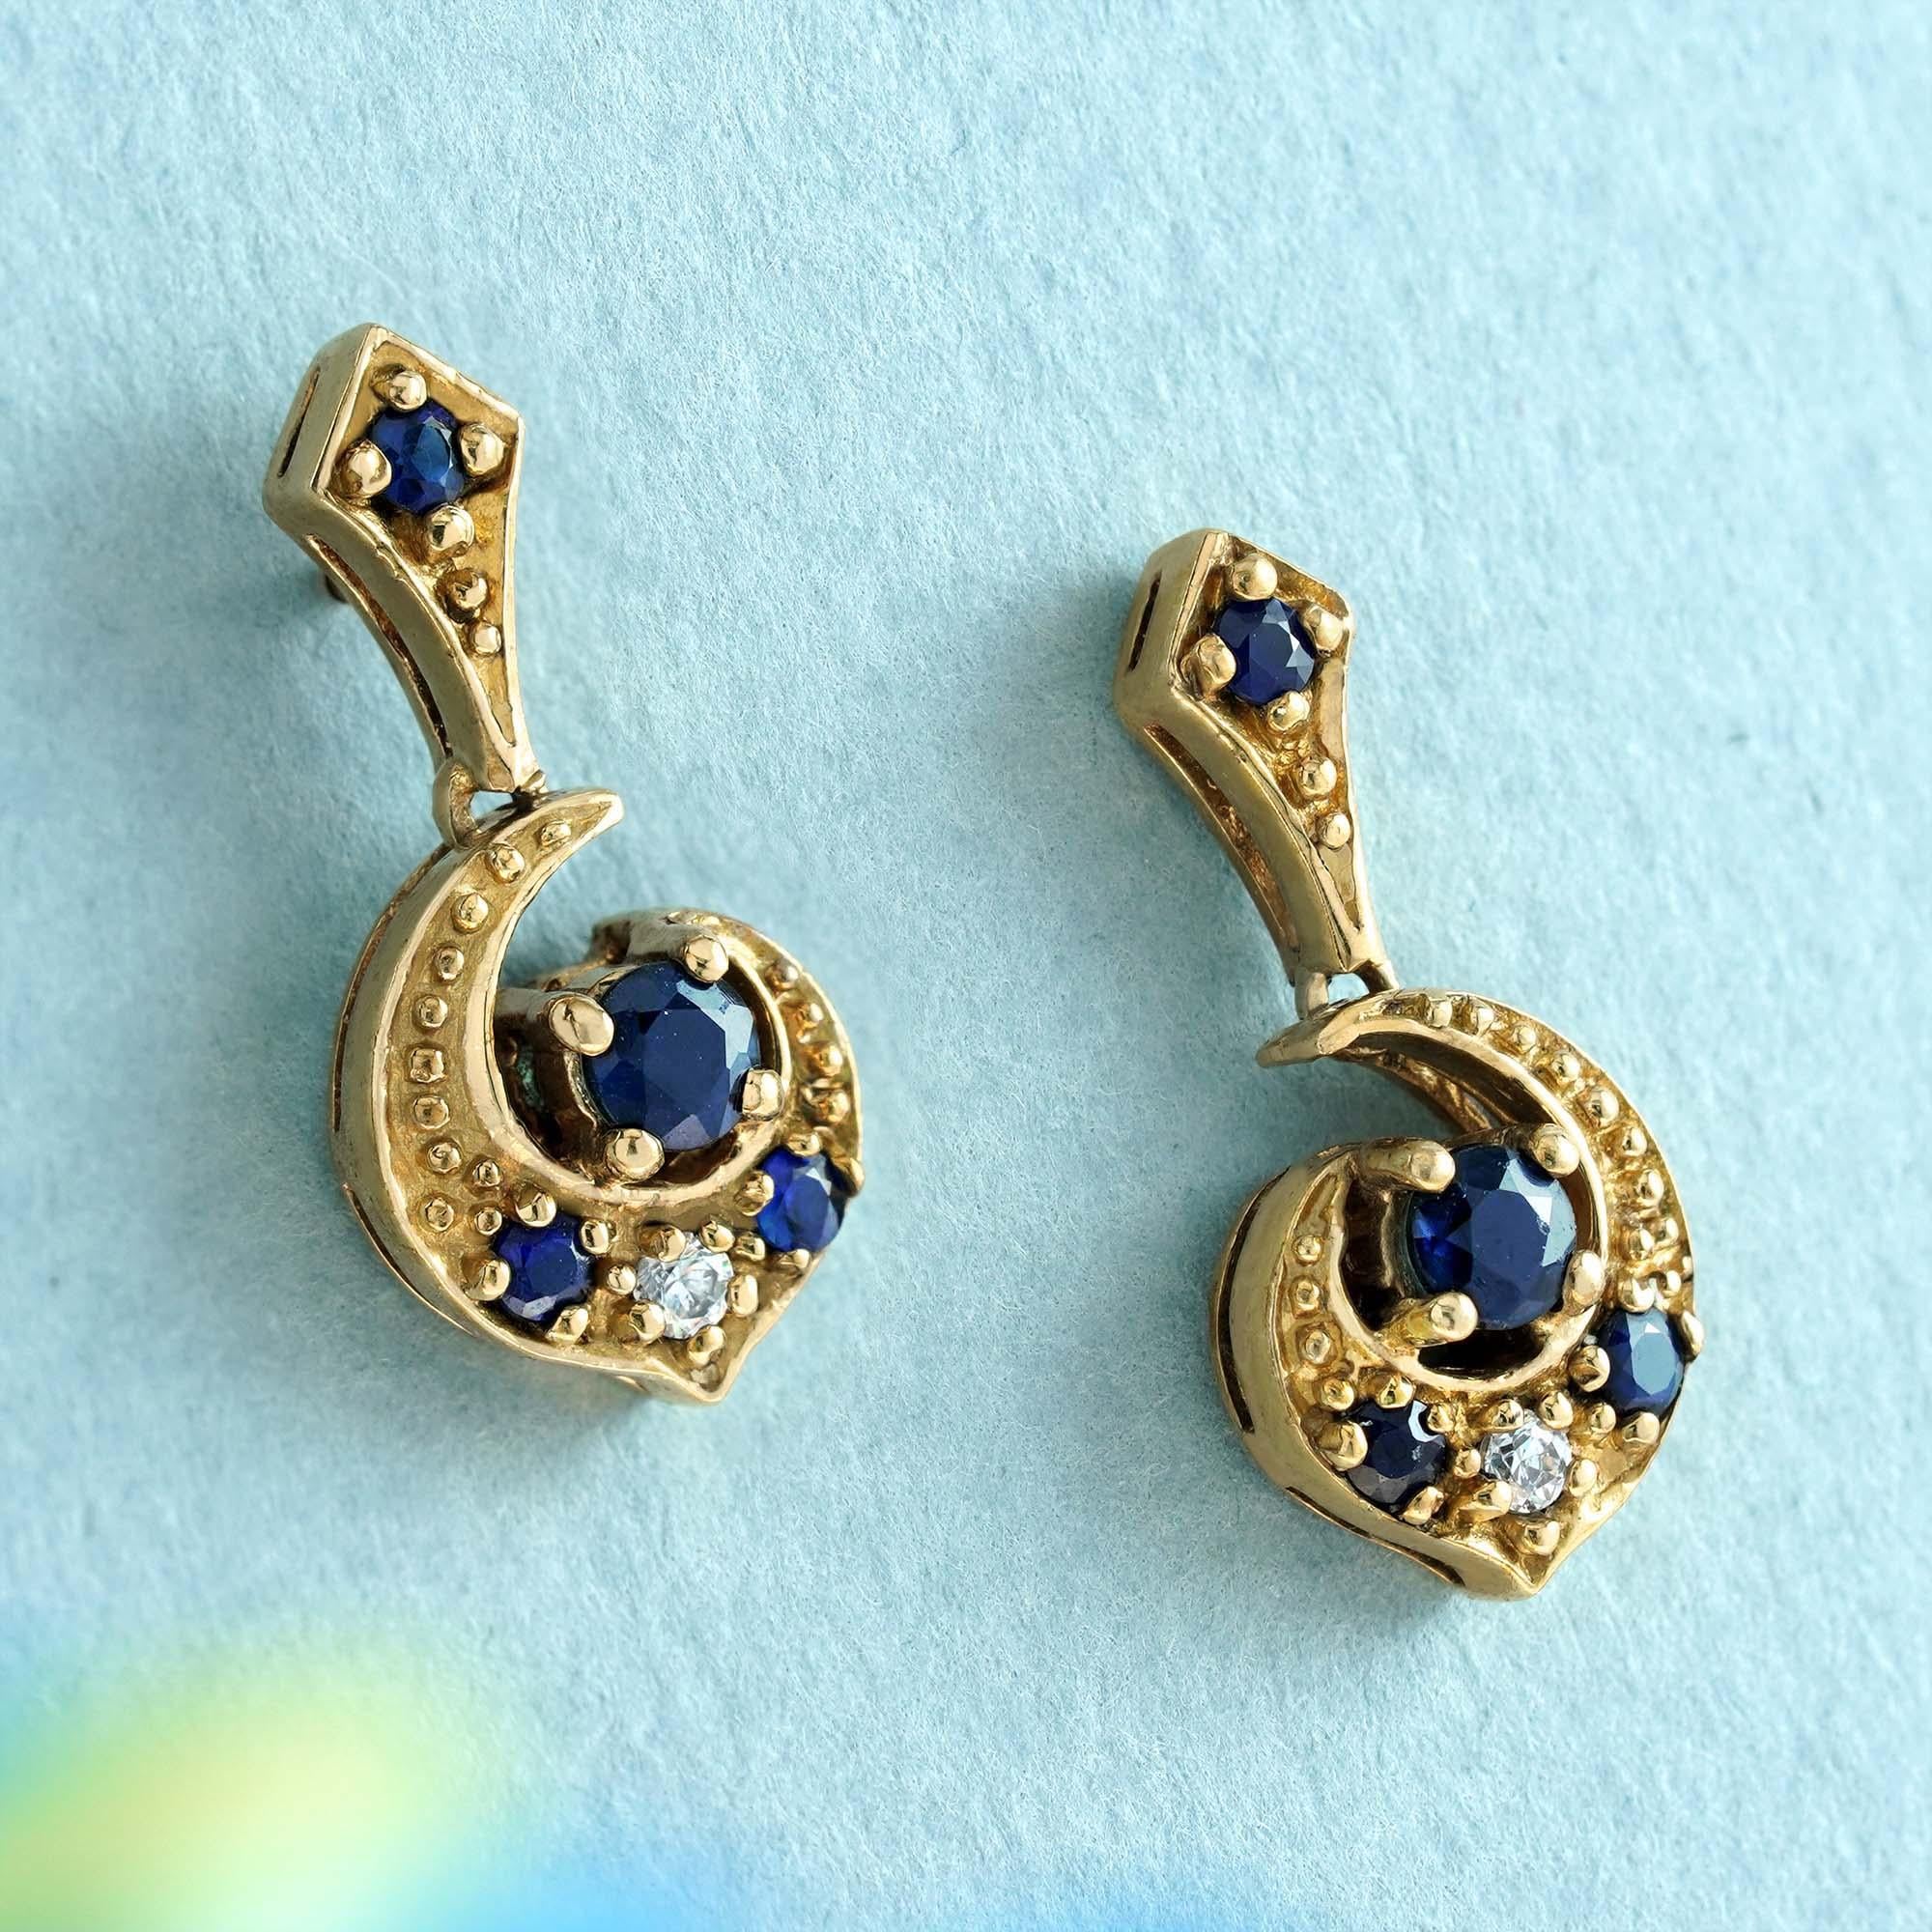 Edwardian Natural Blue Sapphire and Diamond Vintage Style Moon Earrings in Solid 9K Gold